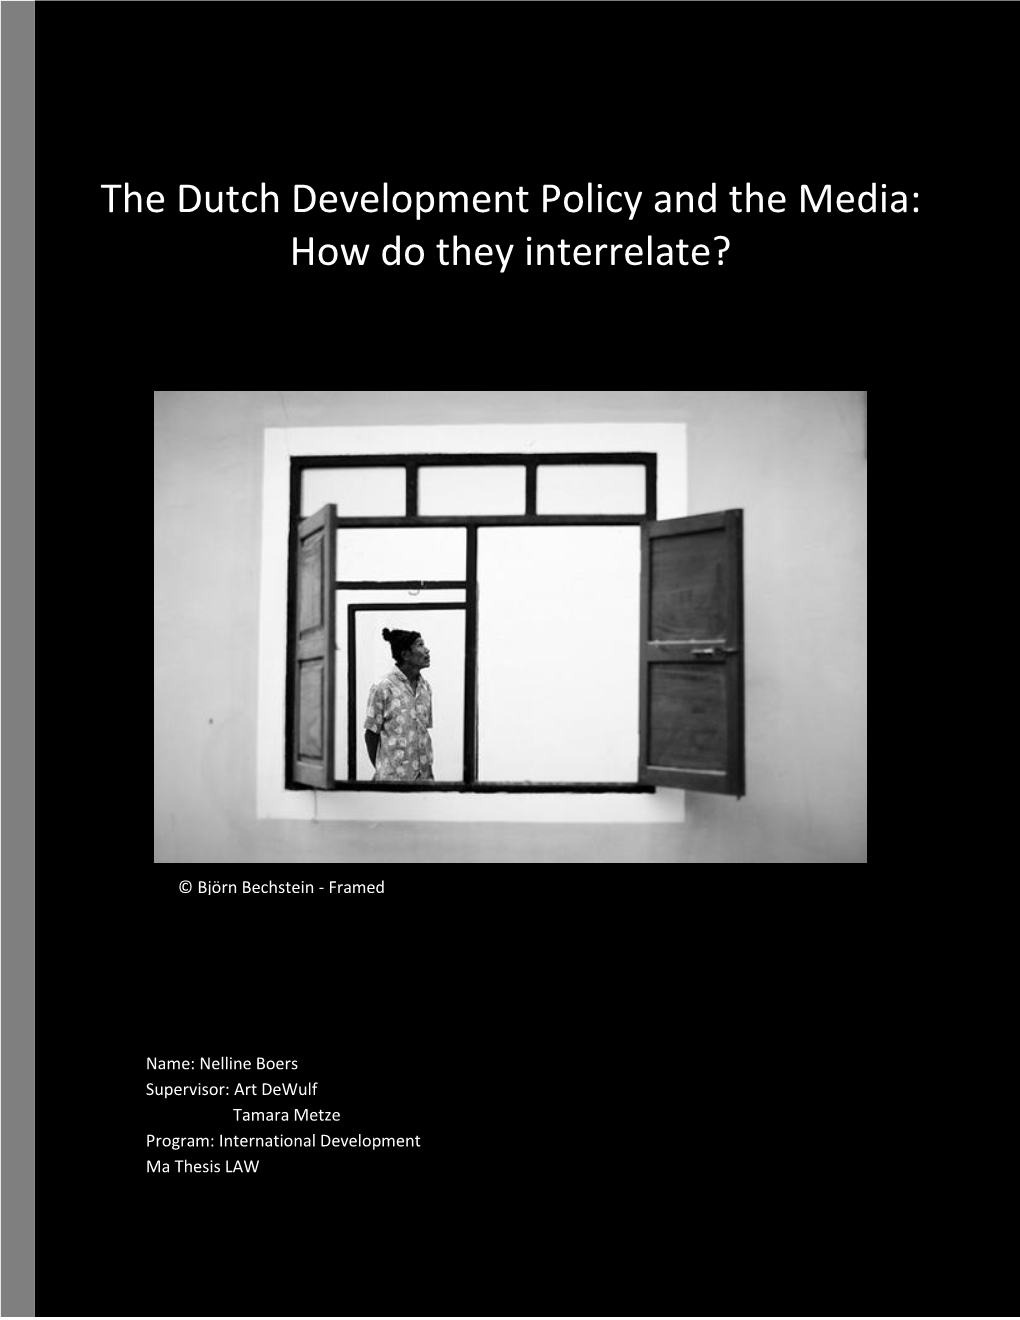 The Dutch Development Policy and the Media